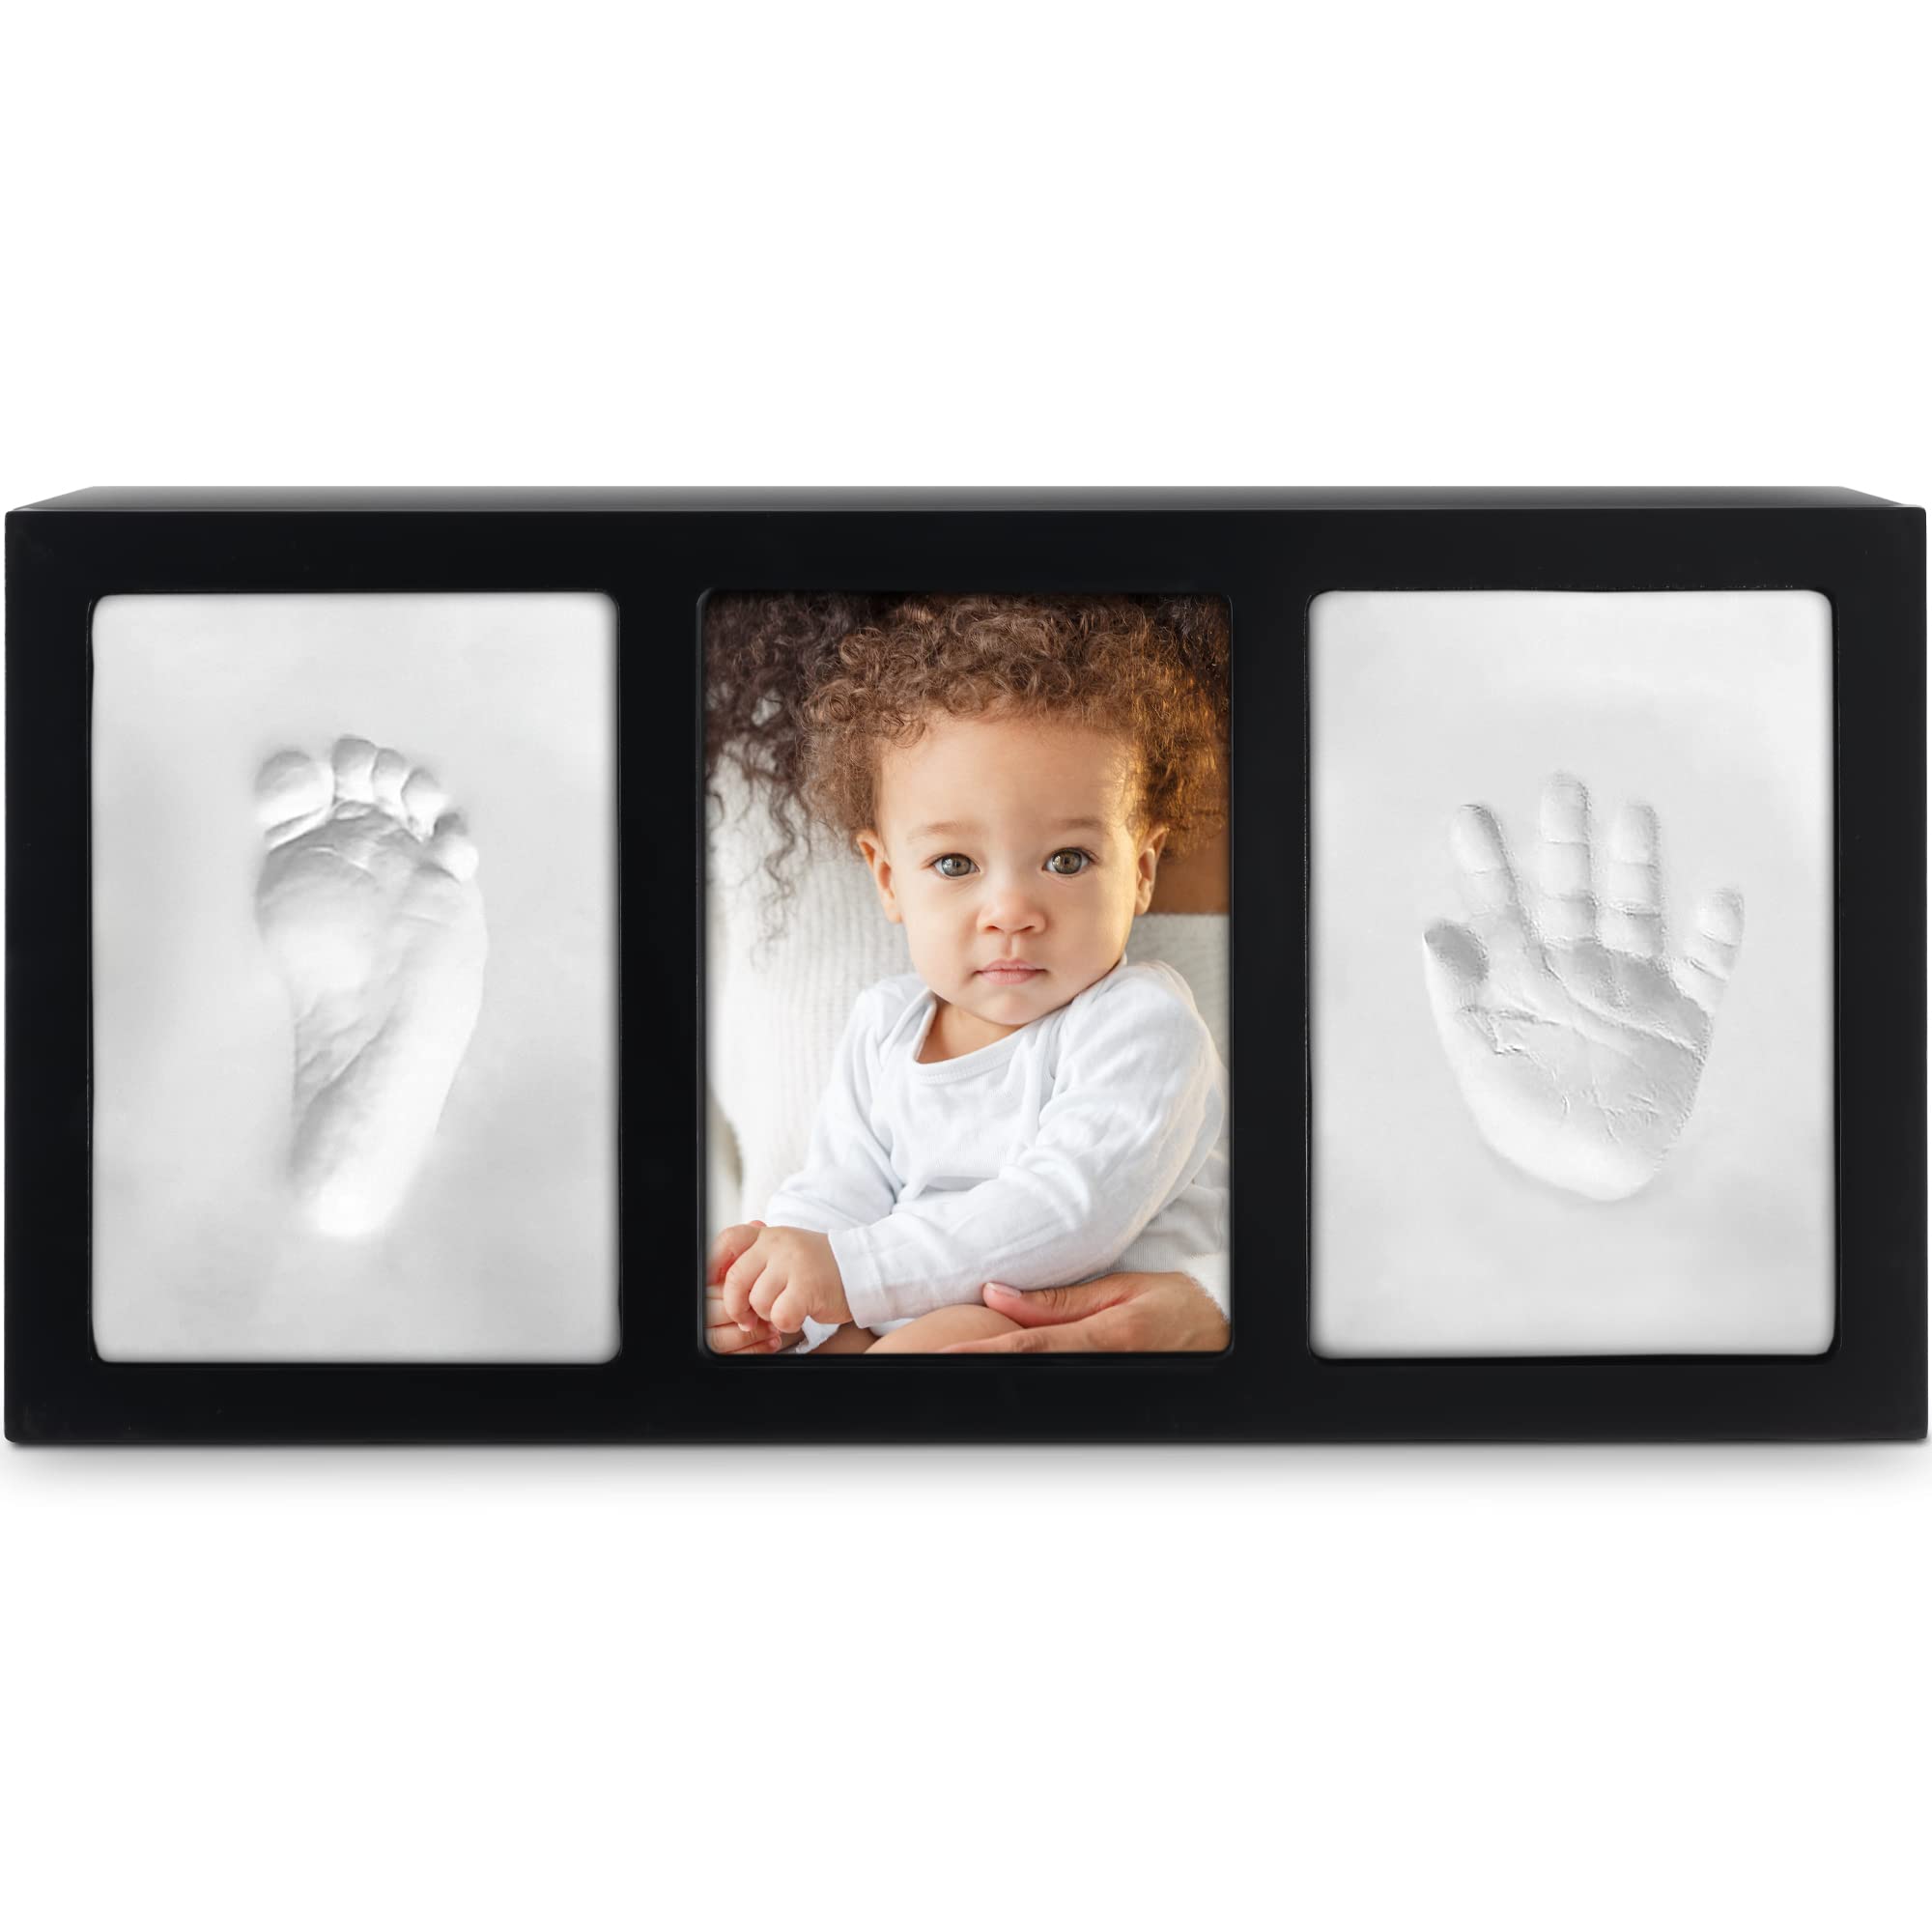 PewinGo Footprint & Handprint Clay Kit, Baby Photo Frame Kit for Newborn Baby Girls and Boys, Baby Shower Gifts,Baby Registry, New Parents Gift